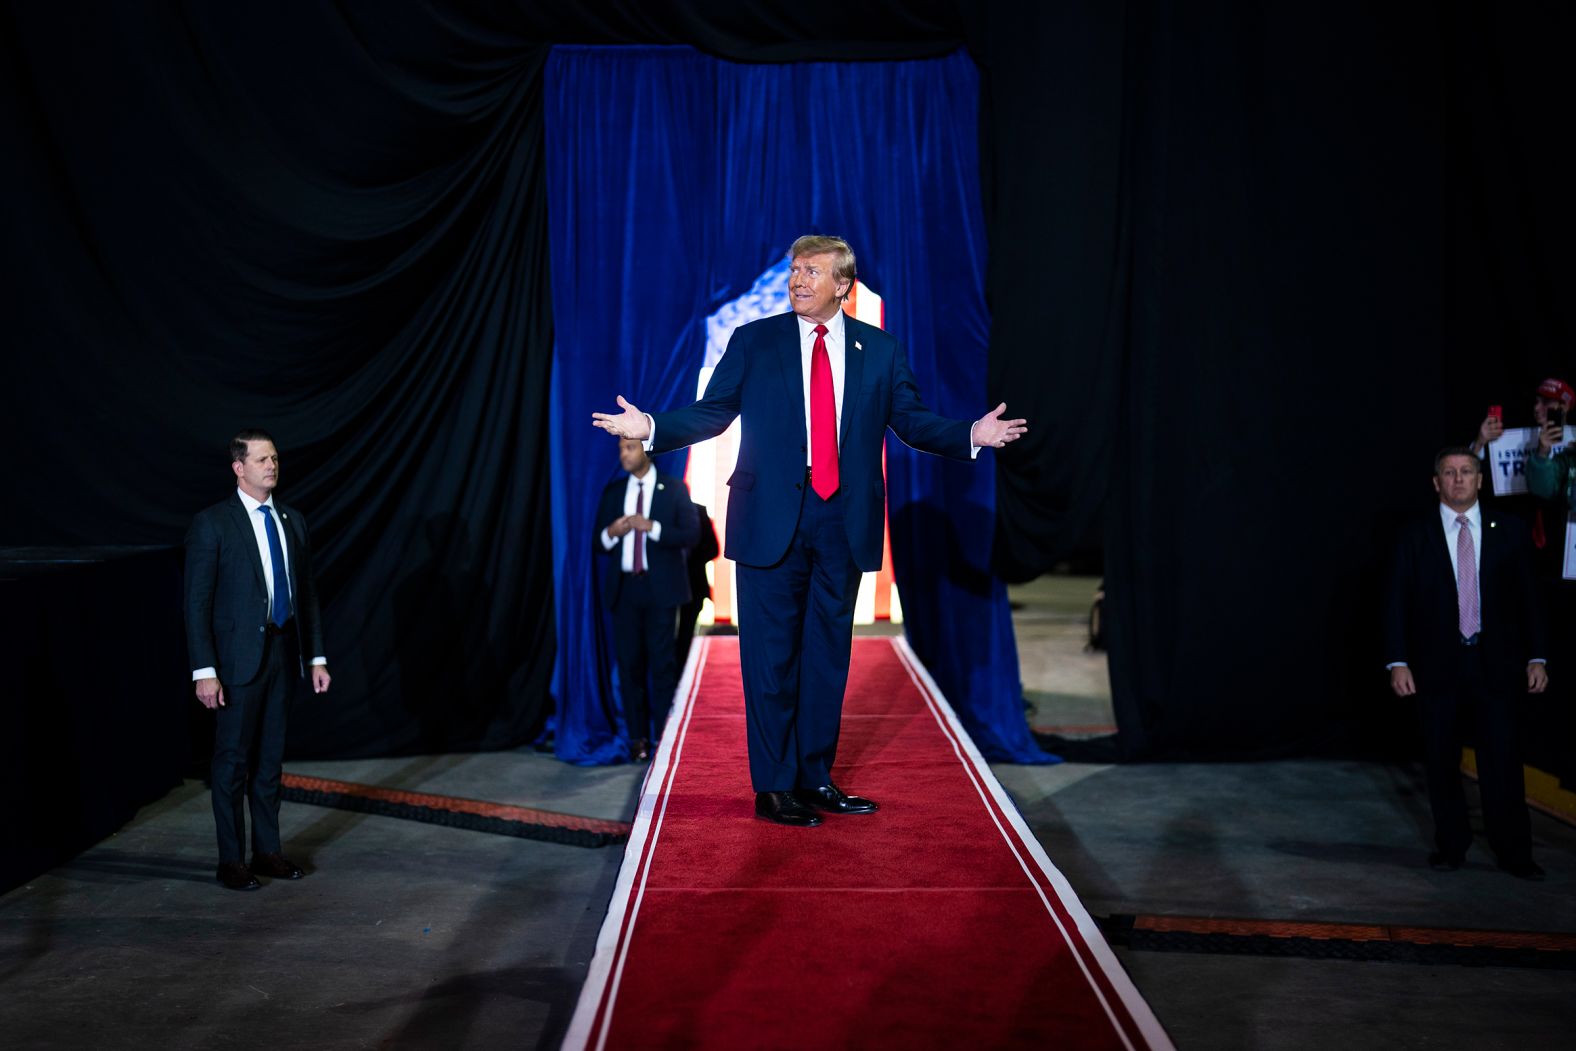 Trump delivers remarks at a campaign rally in Manchester, New Hampshire, in January 2024. Trump <a href="https://www.cnn.com/2024/01/23/politics/trump-new-hampshire-primary/index.html" target="_blank">won the New Hampshire primary</a>, moving closer to his third straight presidential nomination and a rematch with President Joe Biden in the fall.